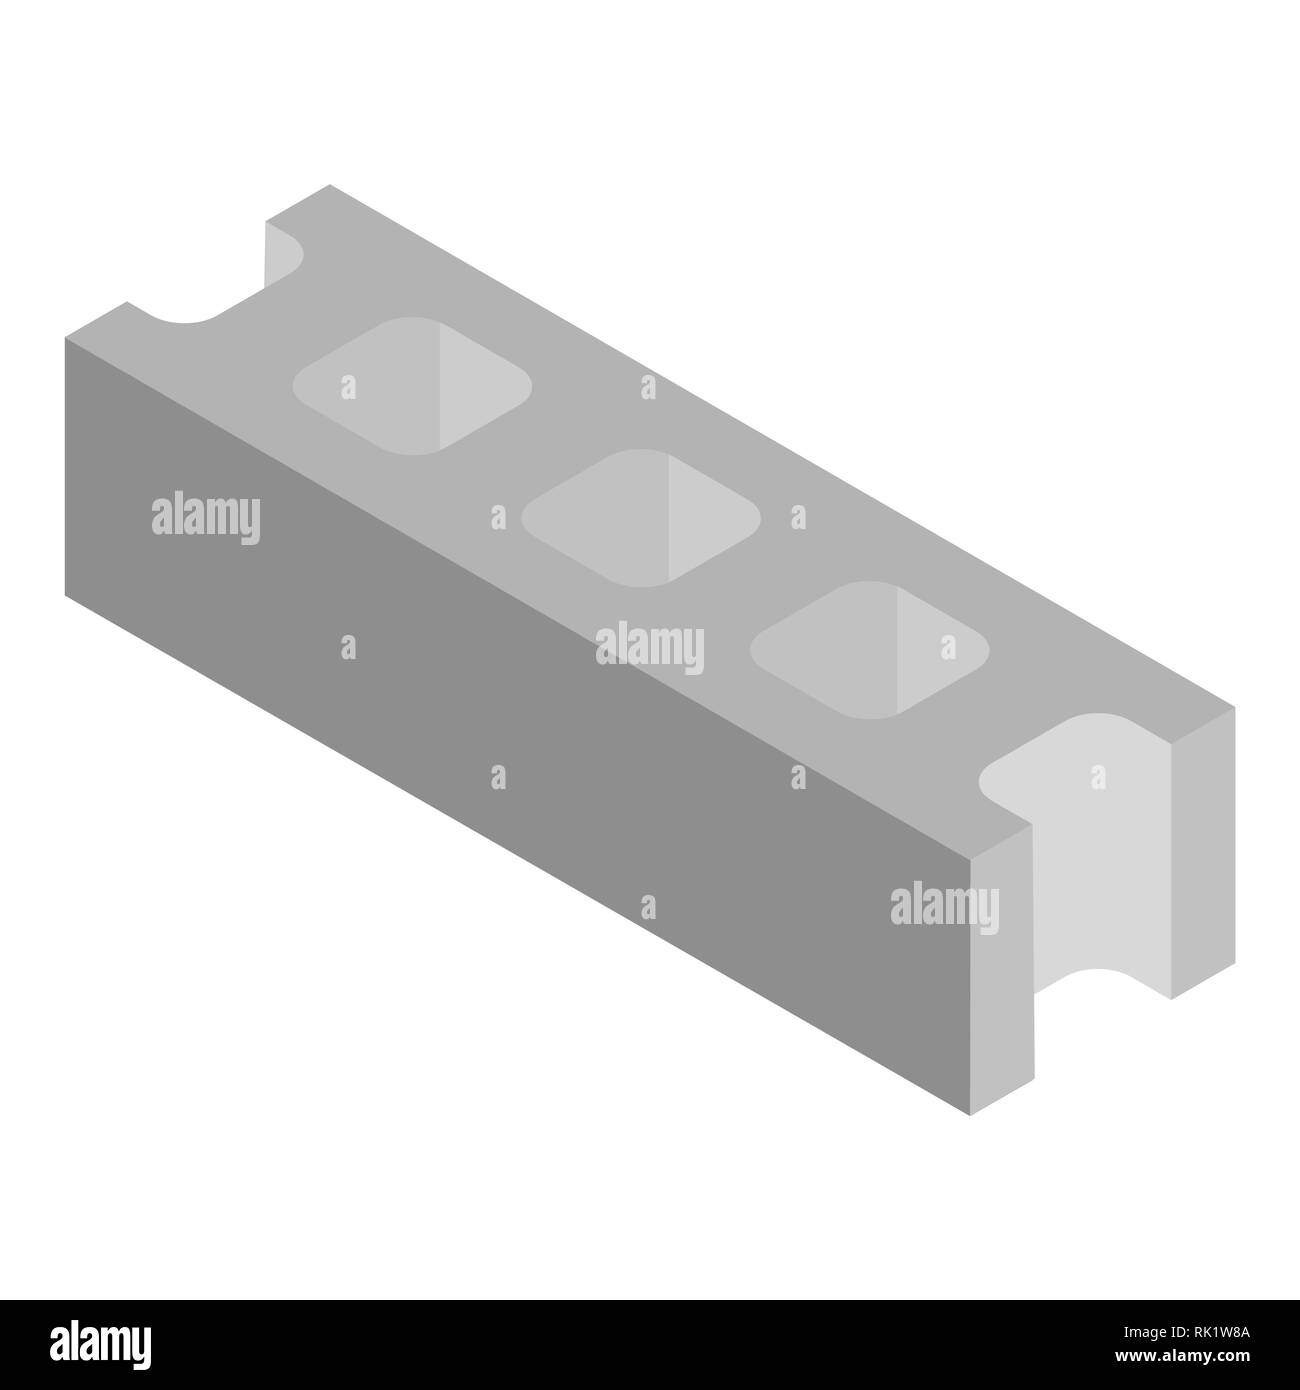 Vector illustration isometric standard concrete building block for architectural works. Cement block icon used for masonry Stock Vector